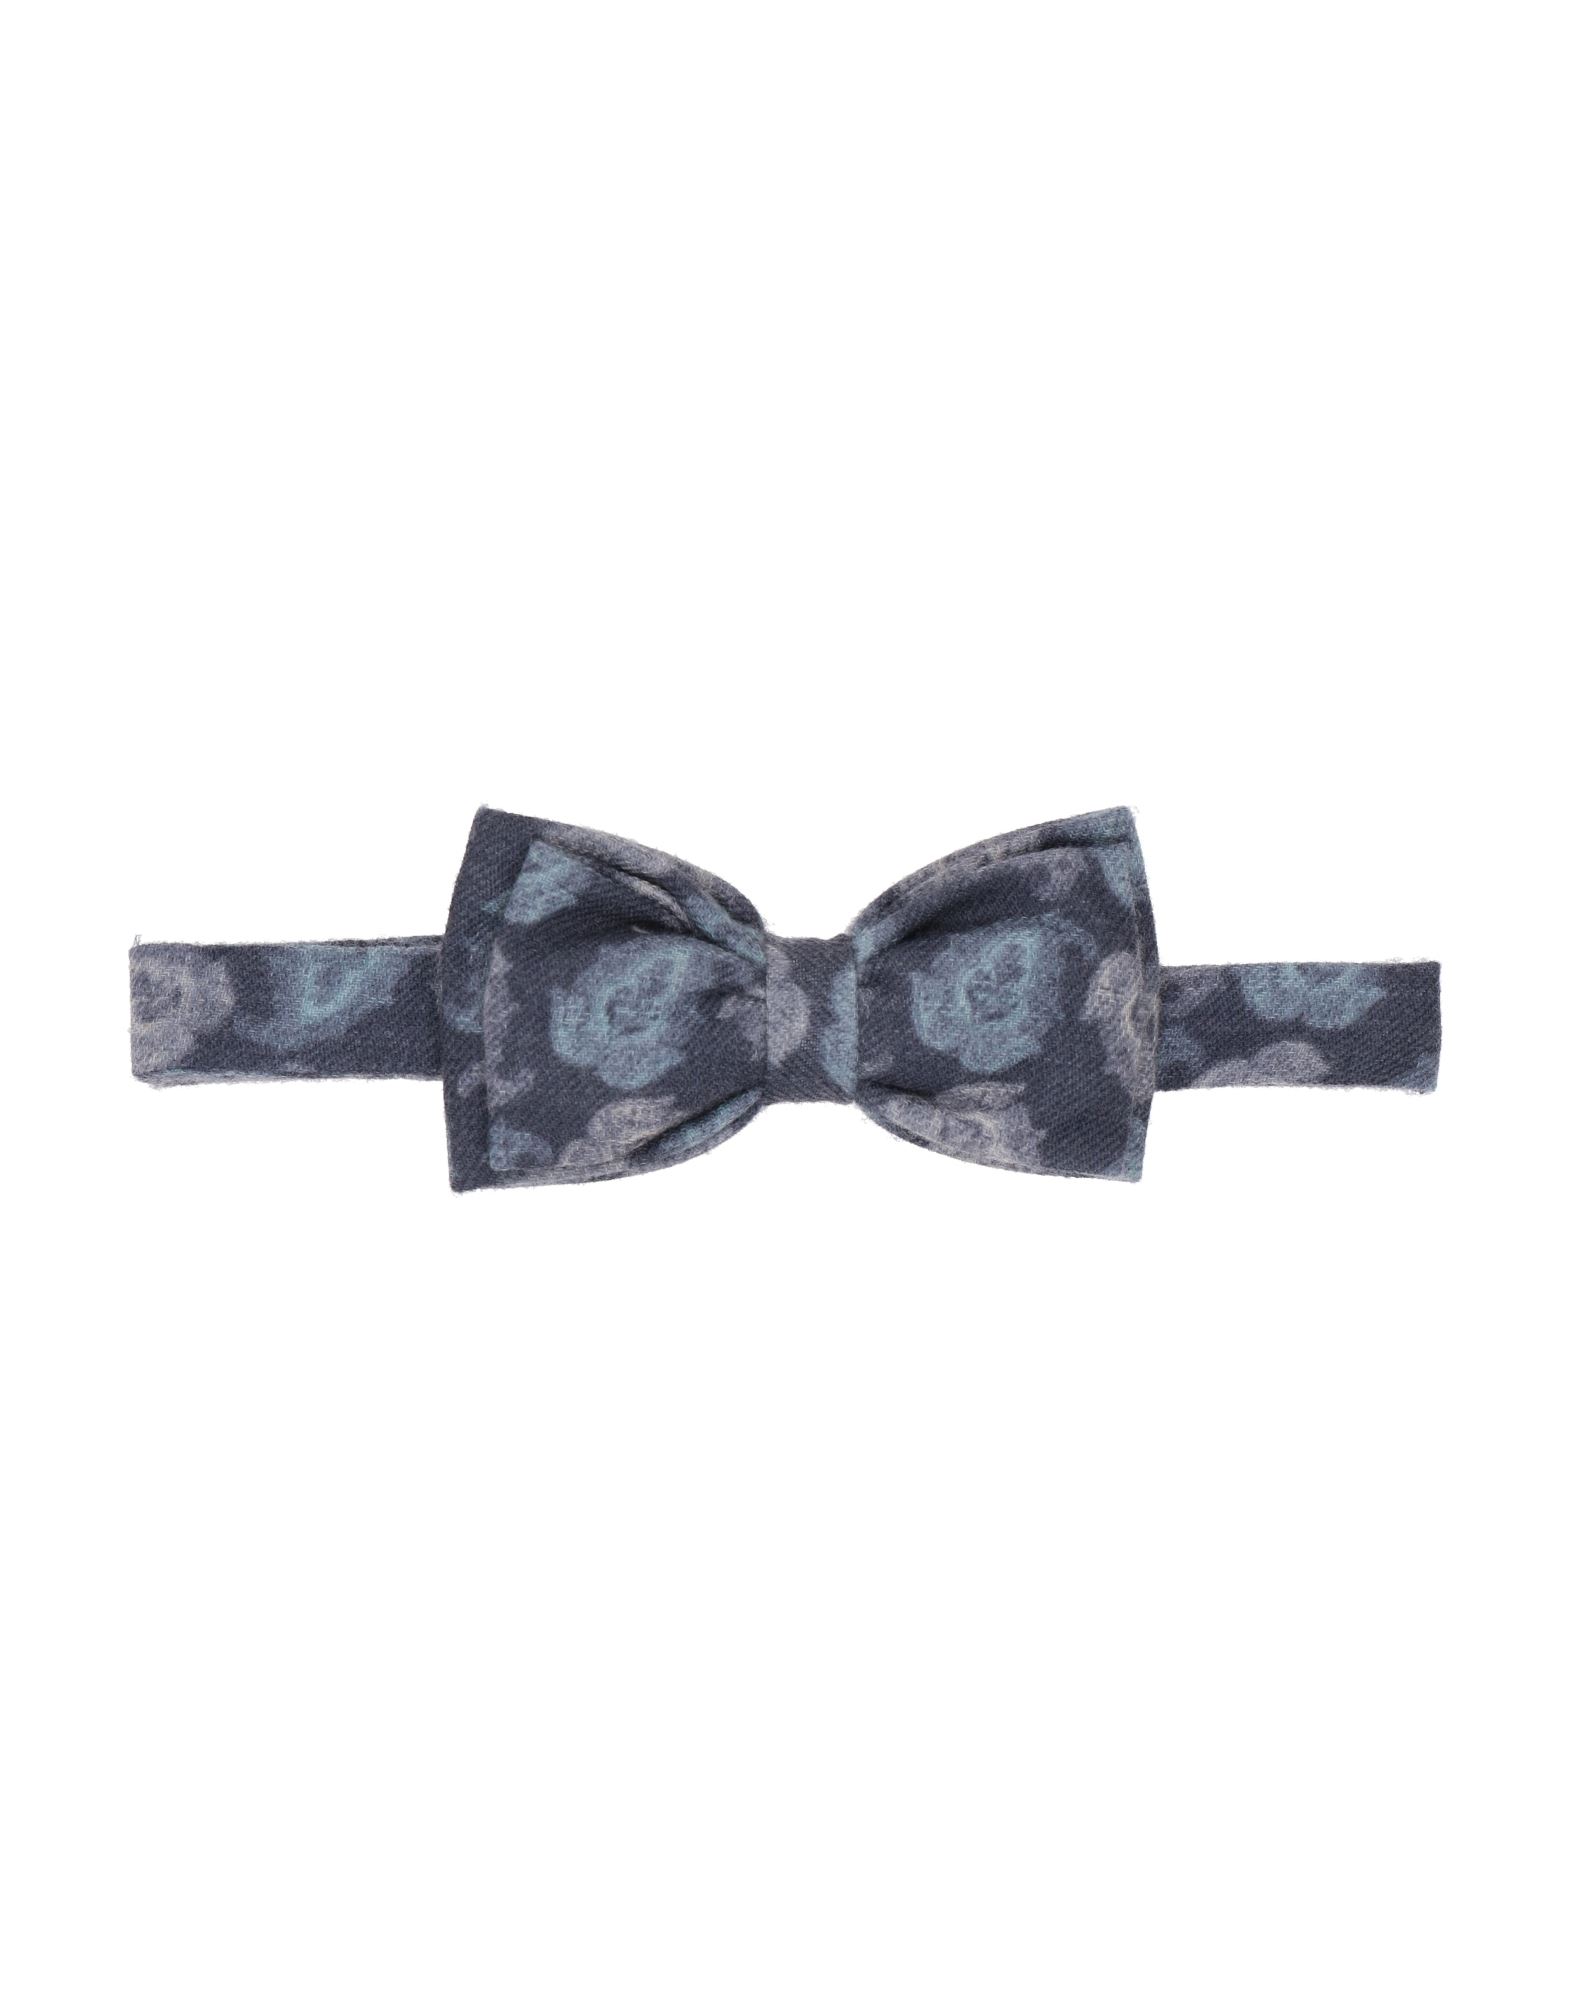 FEFÈ GLAMOUR POCHETTE TIES & BOW TIES